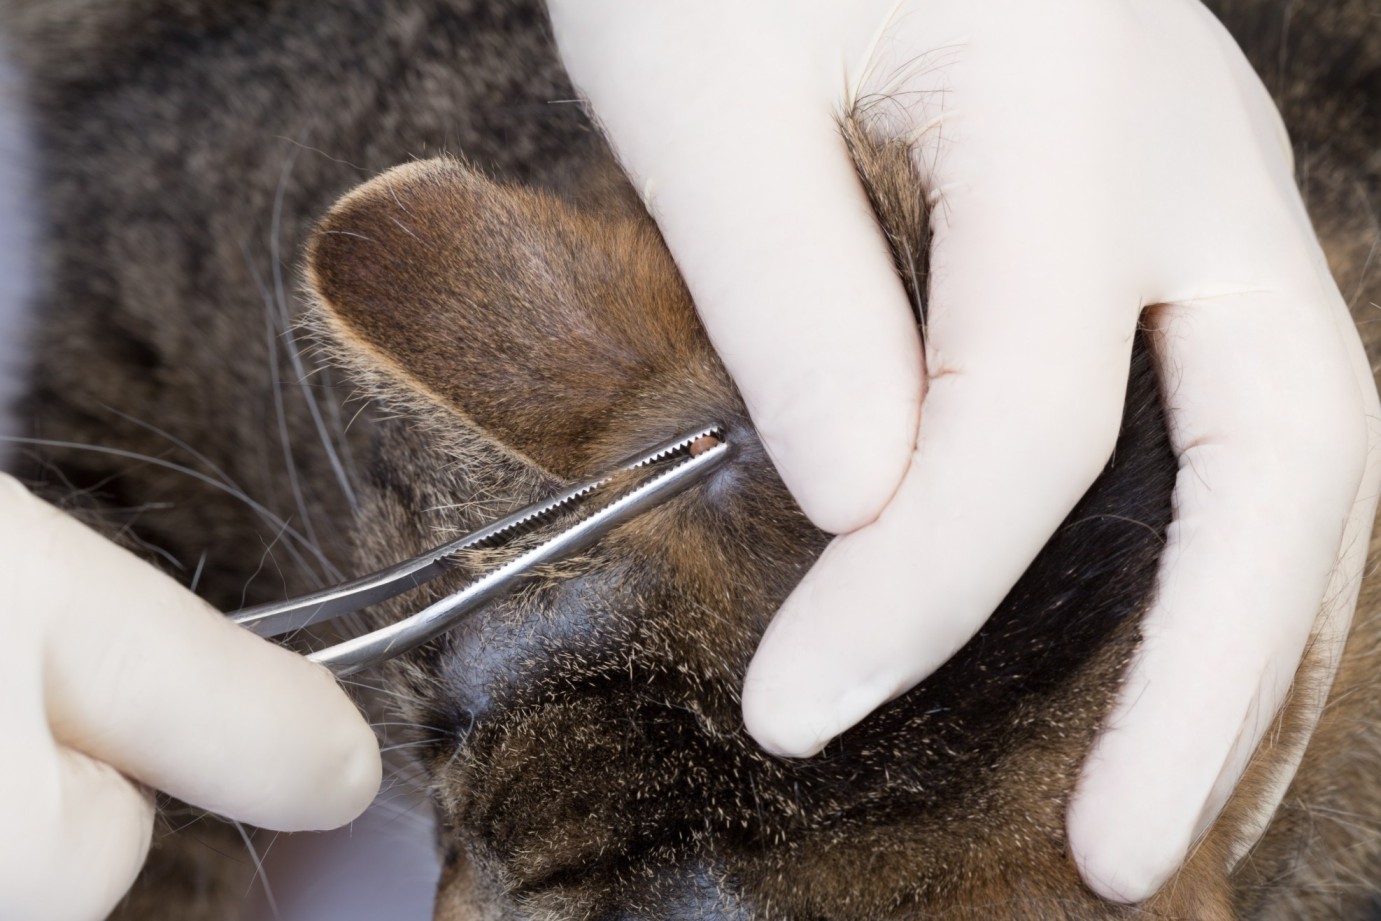 A vet wearing gloves removing a tick from a cat with a tweezer